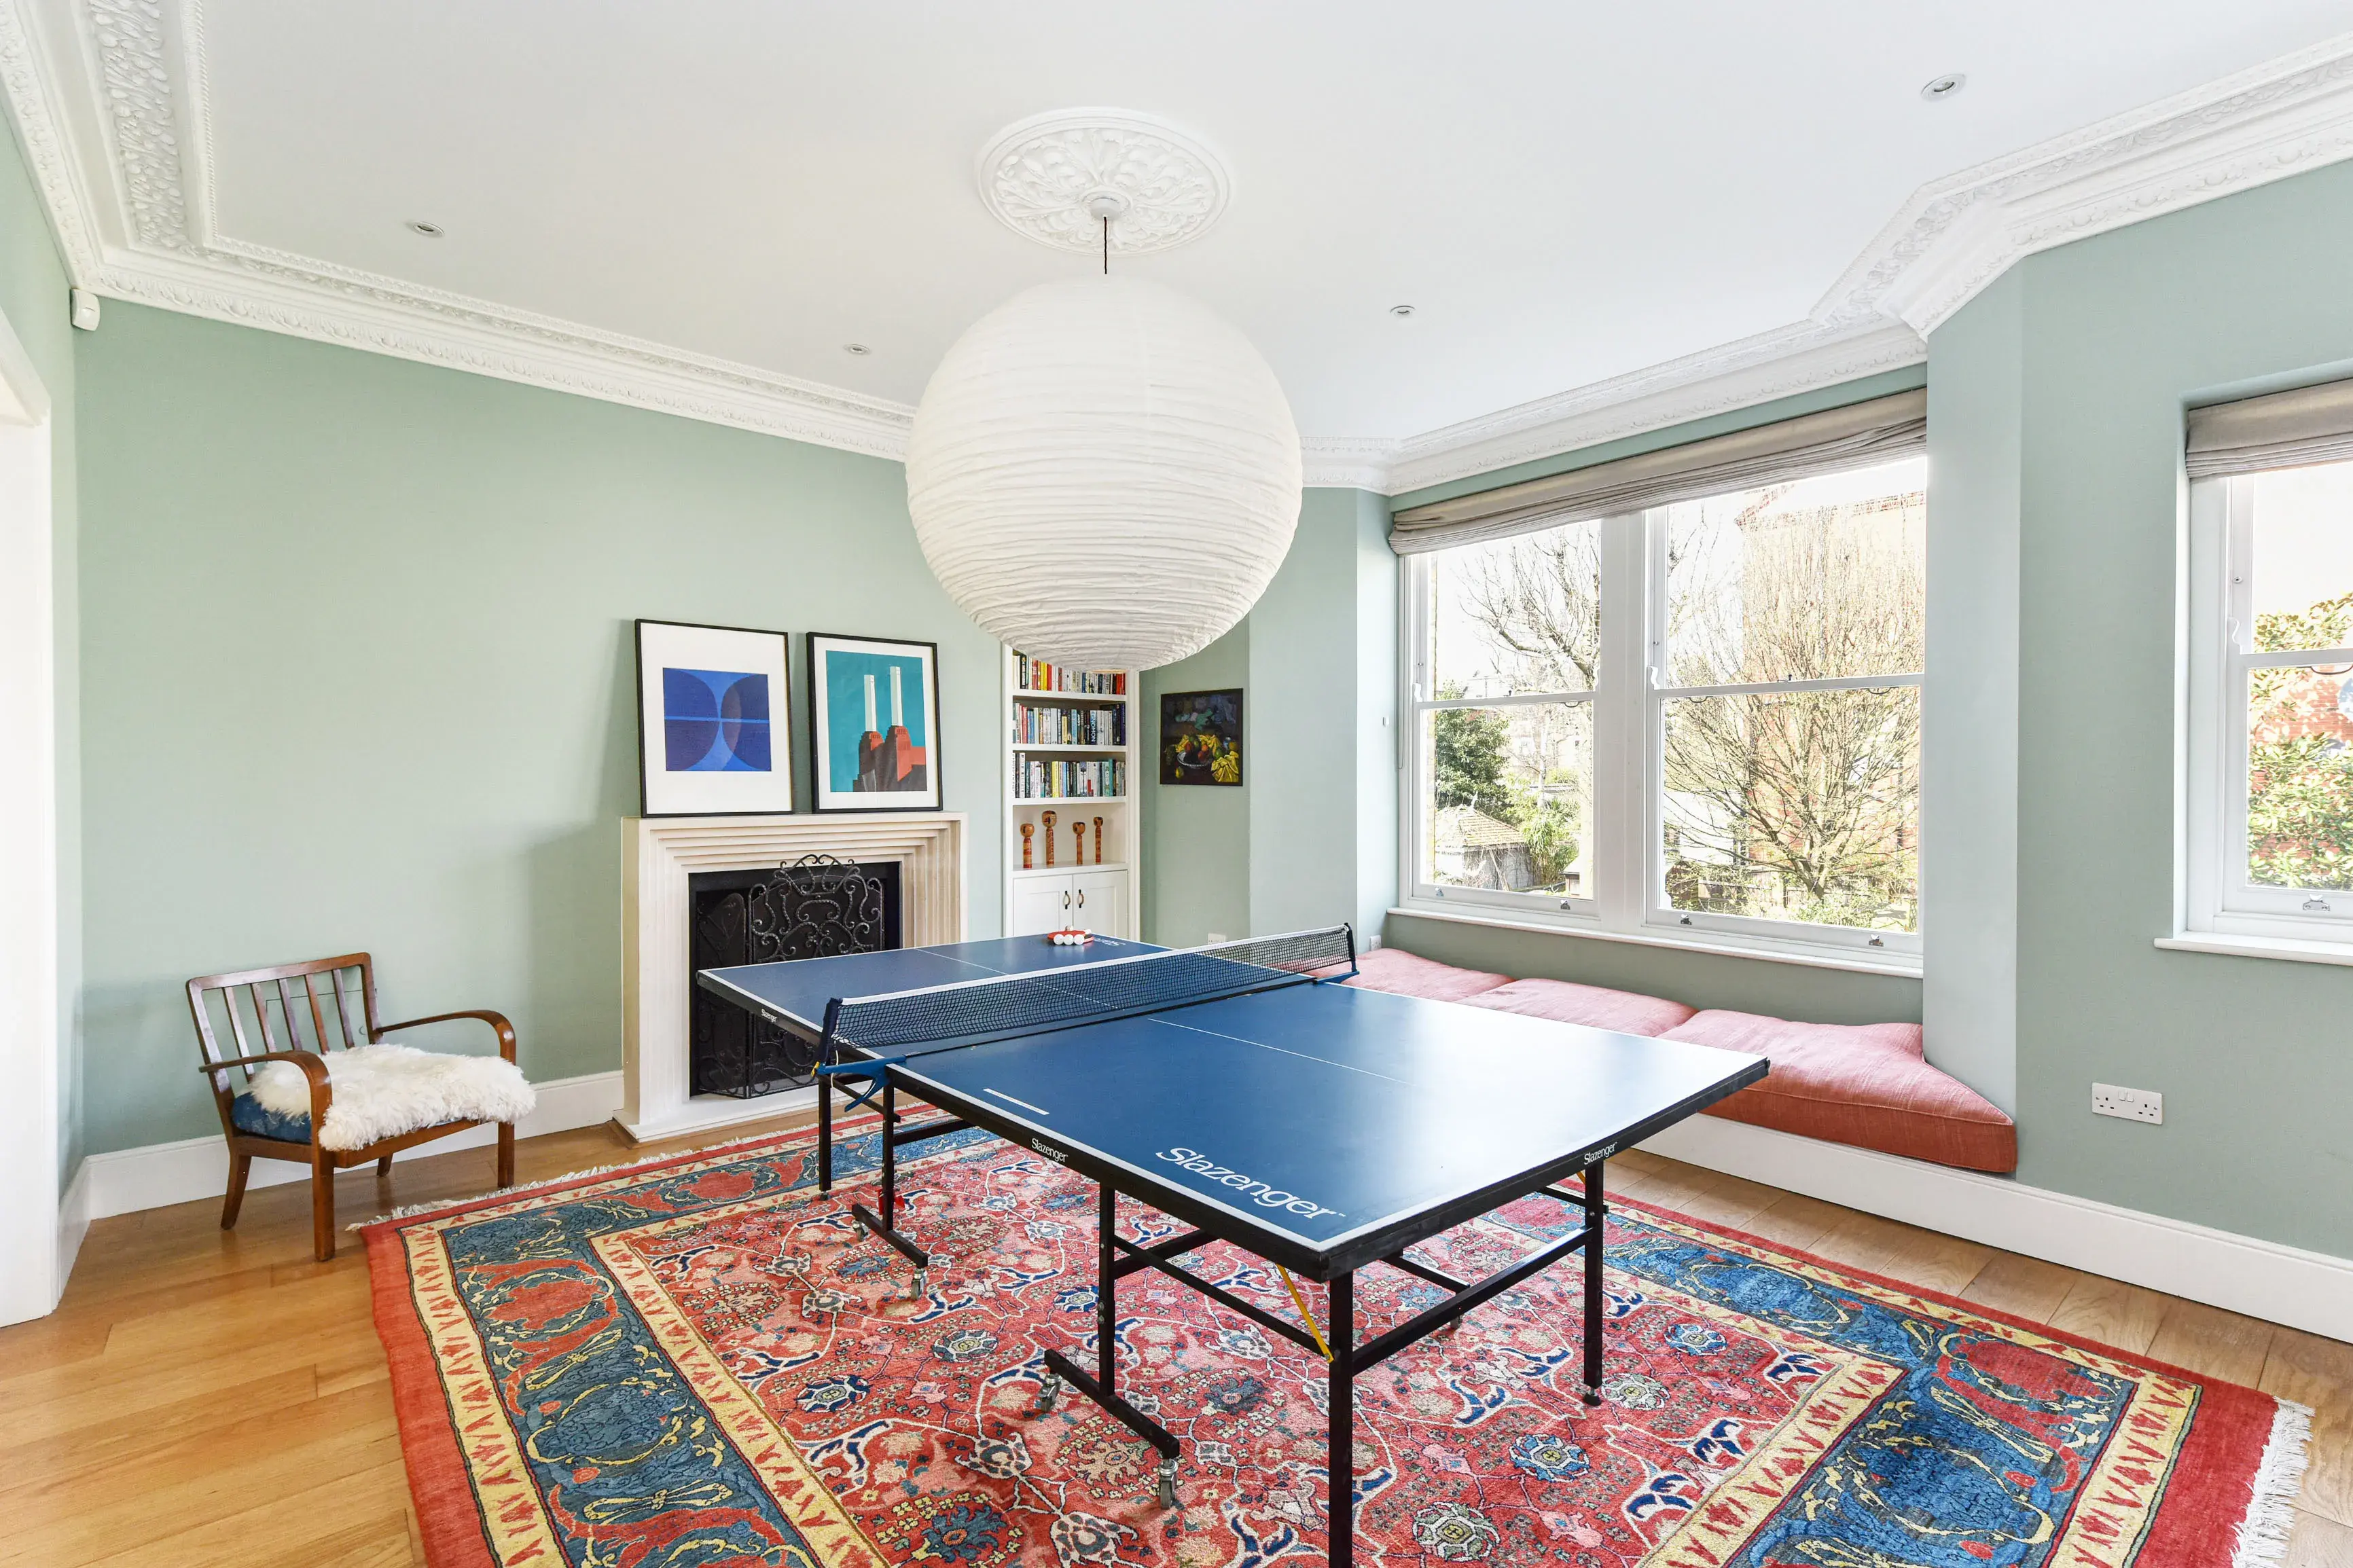 Brondesbury Road, holiday home in Hampstead, London